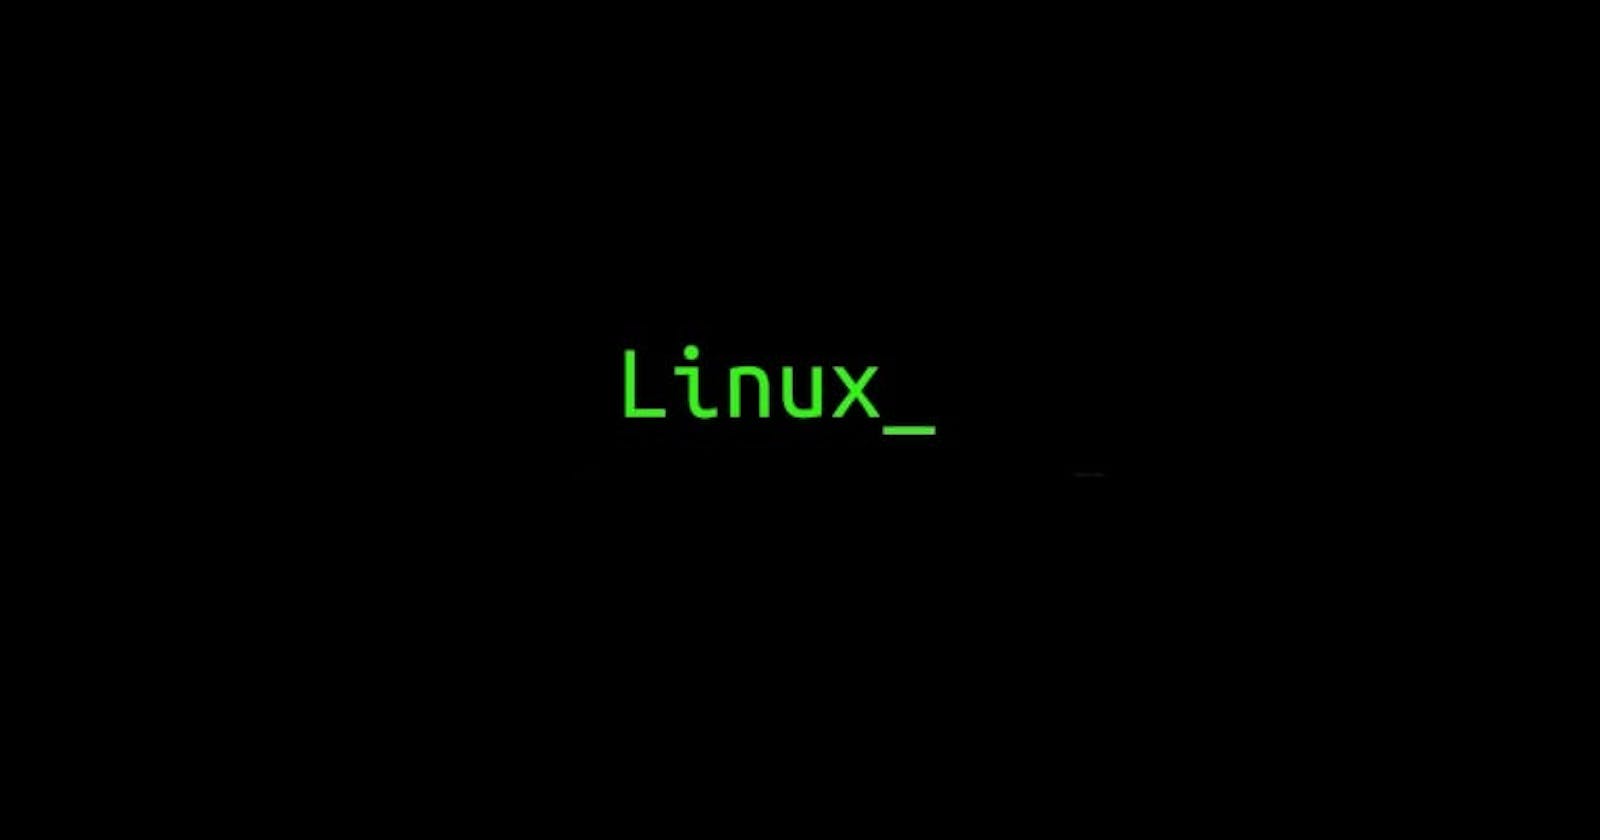 Day 3 : Basic Linux commands